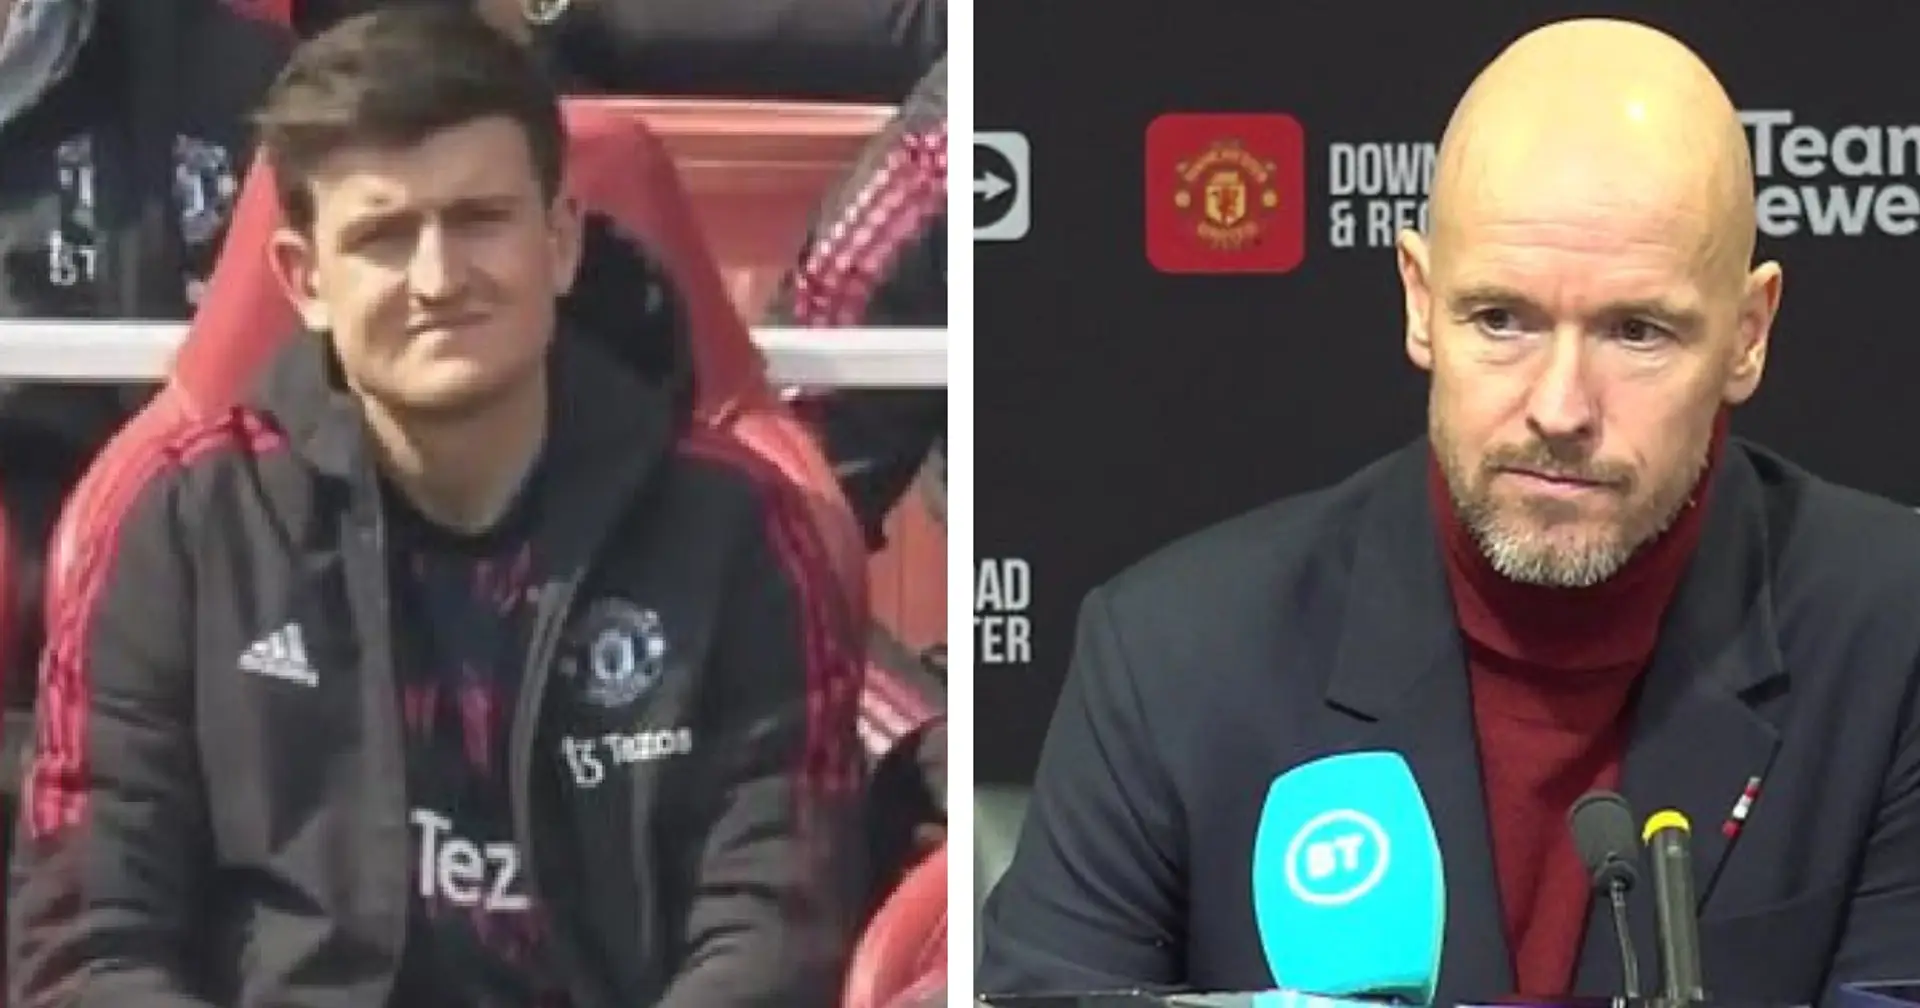 Ten Hag confirms two players could leave Man United - Maguire not among 